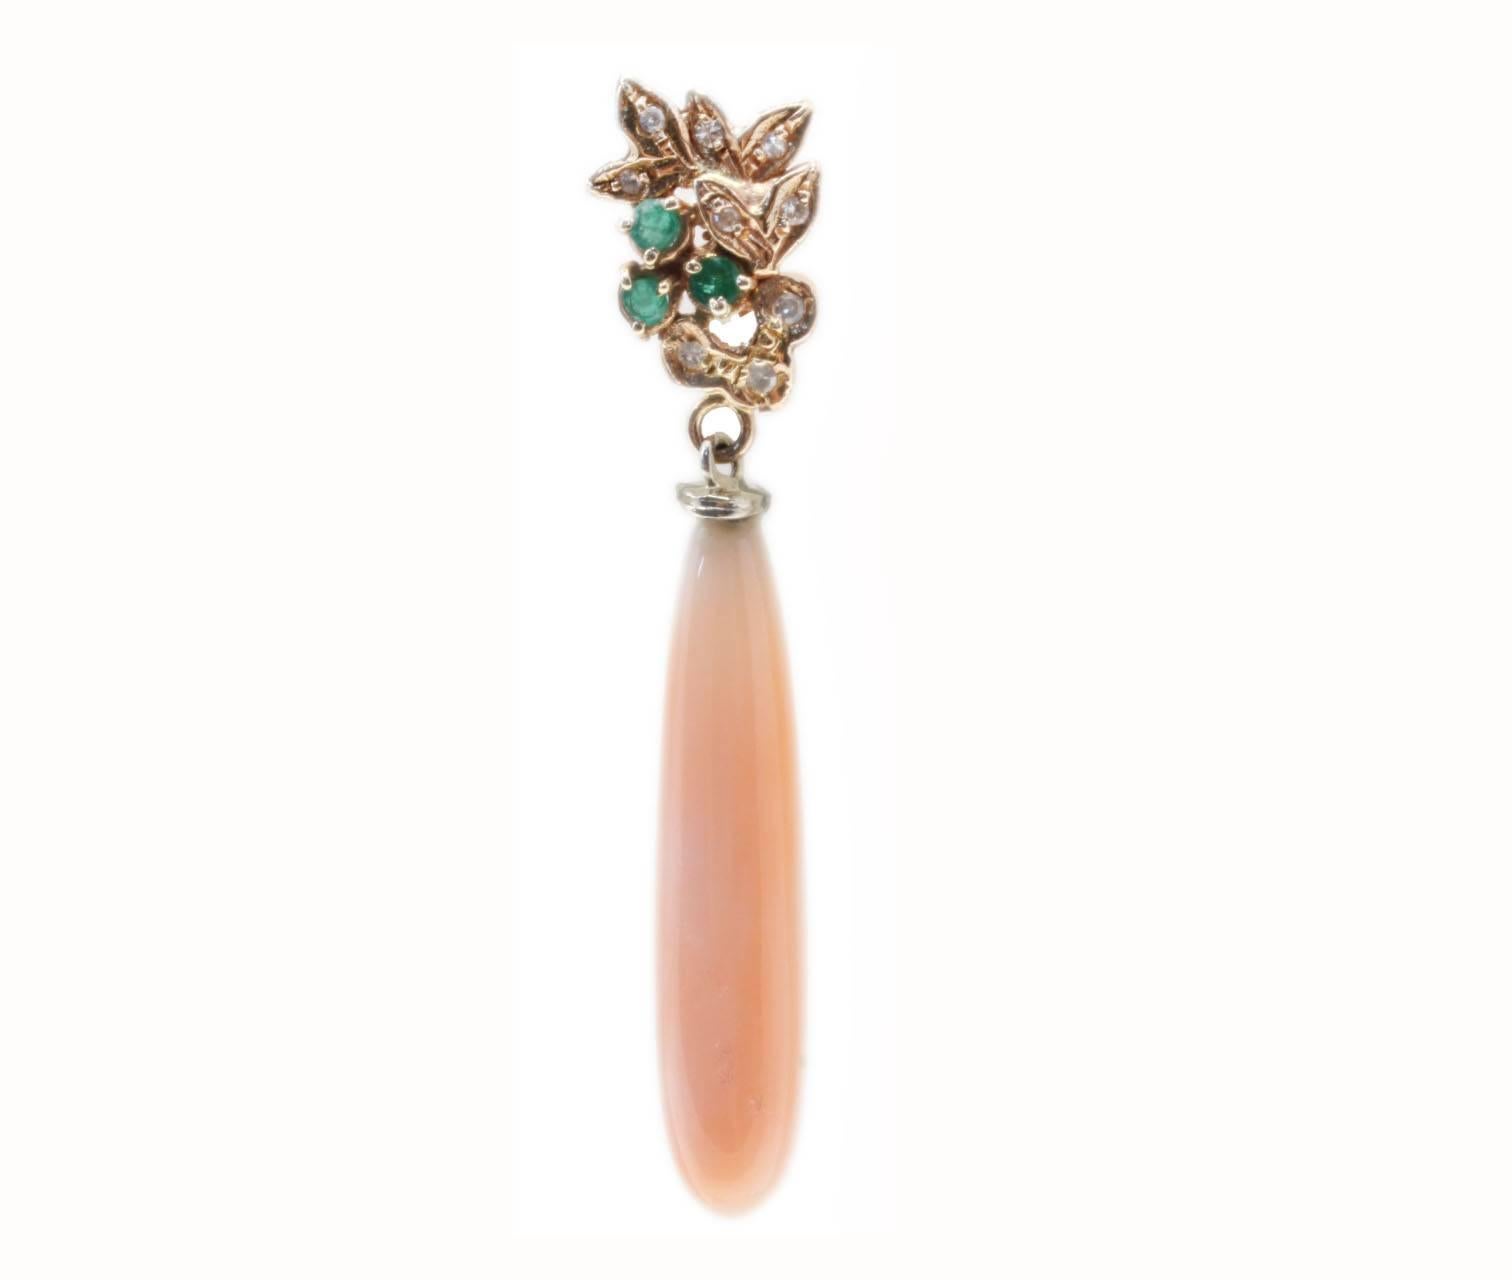 Charming  coral drop earrings, composed of diamonds and emeralds on top of a light pink coral drop, all is mounted in 14K rose gold.
Tot weight 5.6 g both earrings, single one 2.8 g
Diamonds 0.16 ct
Emeralds 0.26 ct
Coral 3.20 g

Rf. rgf